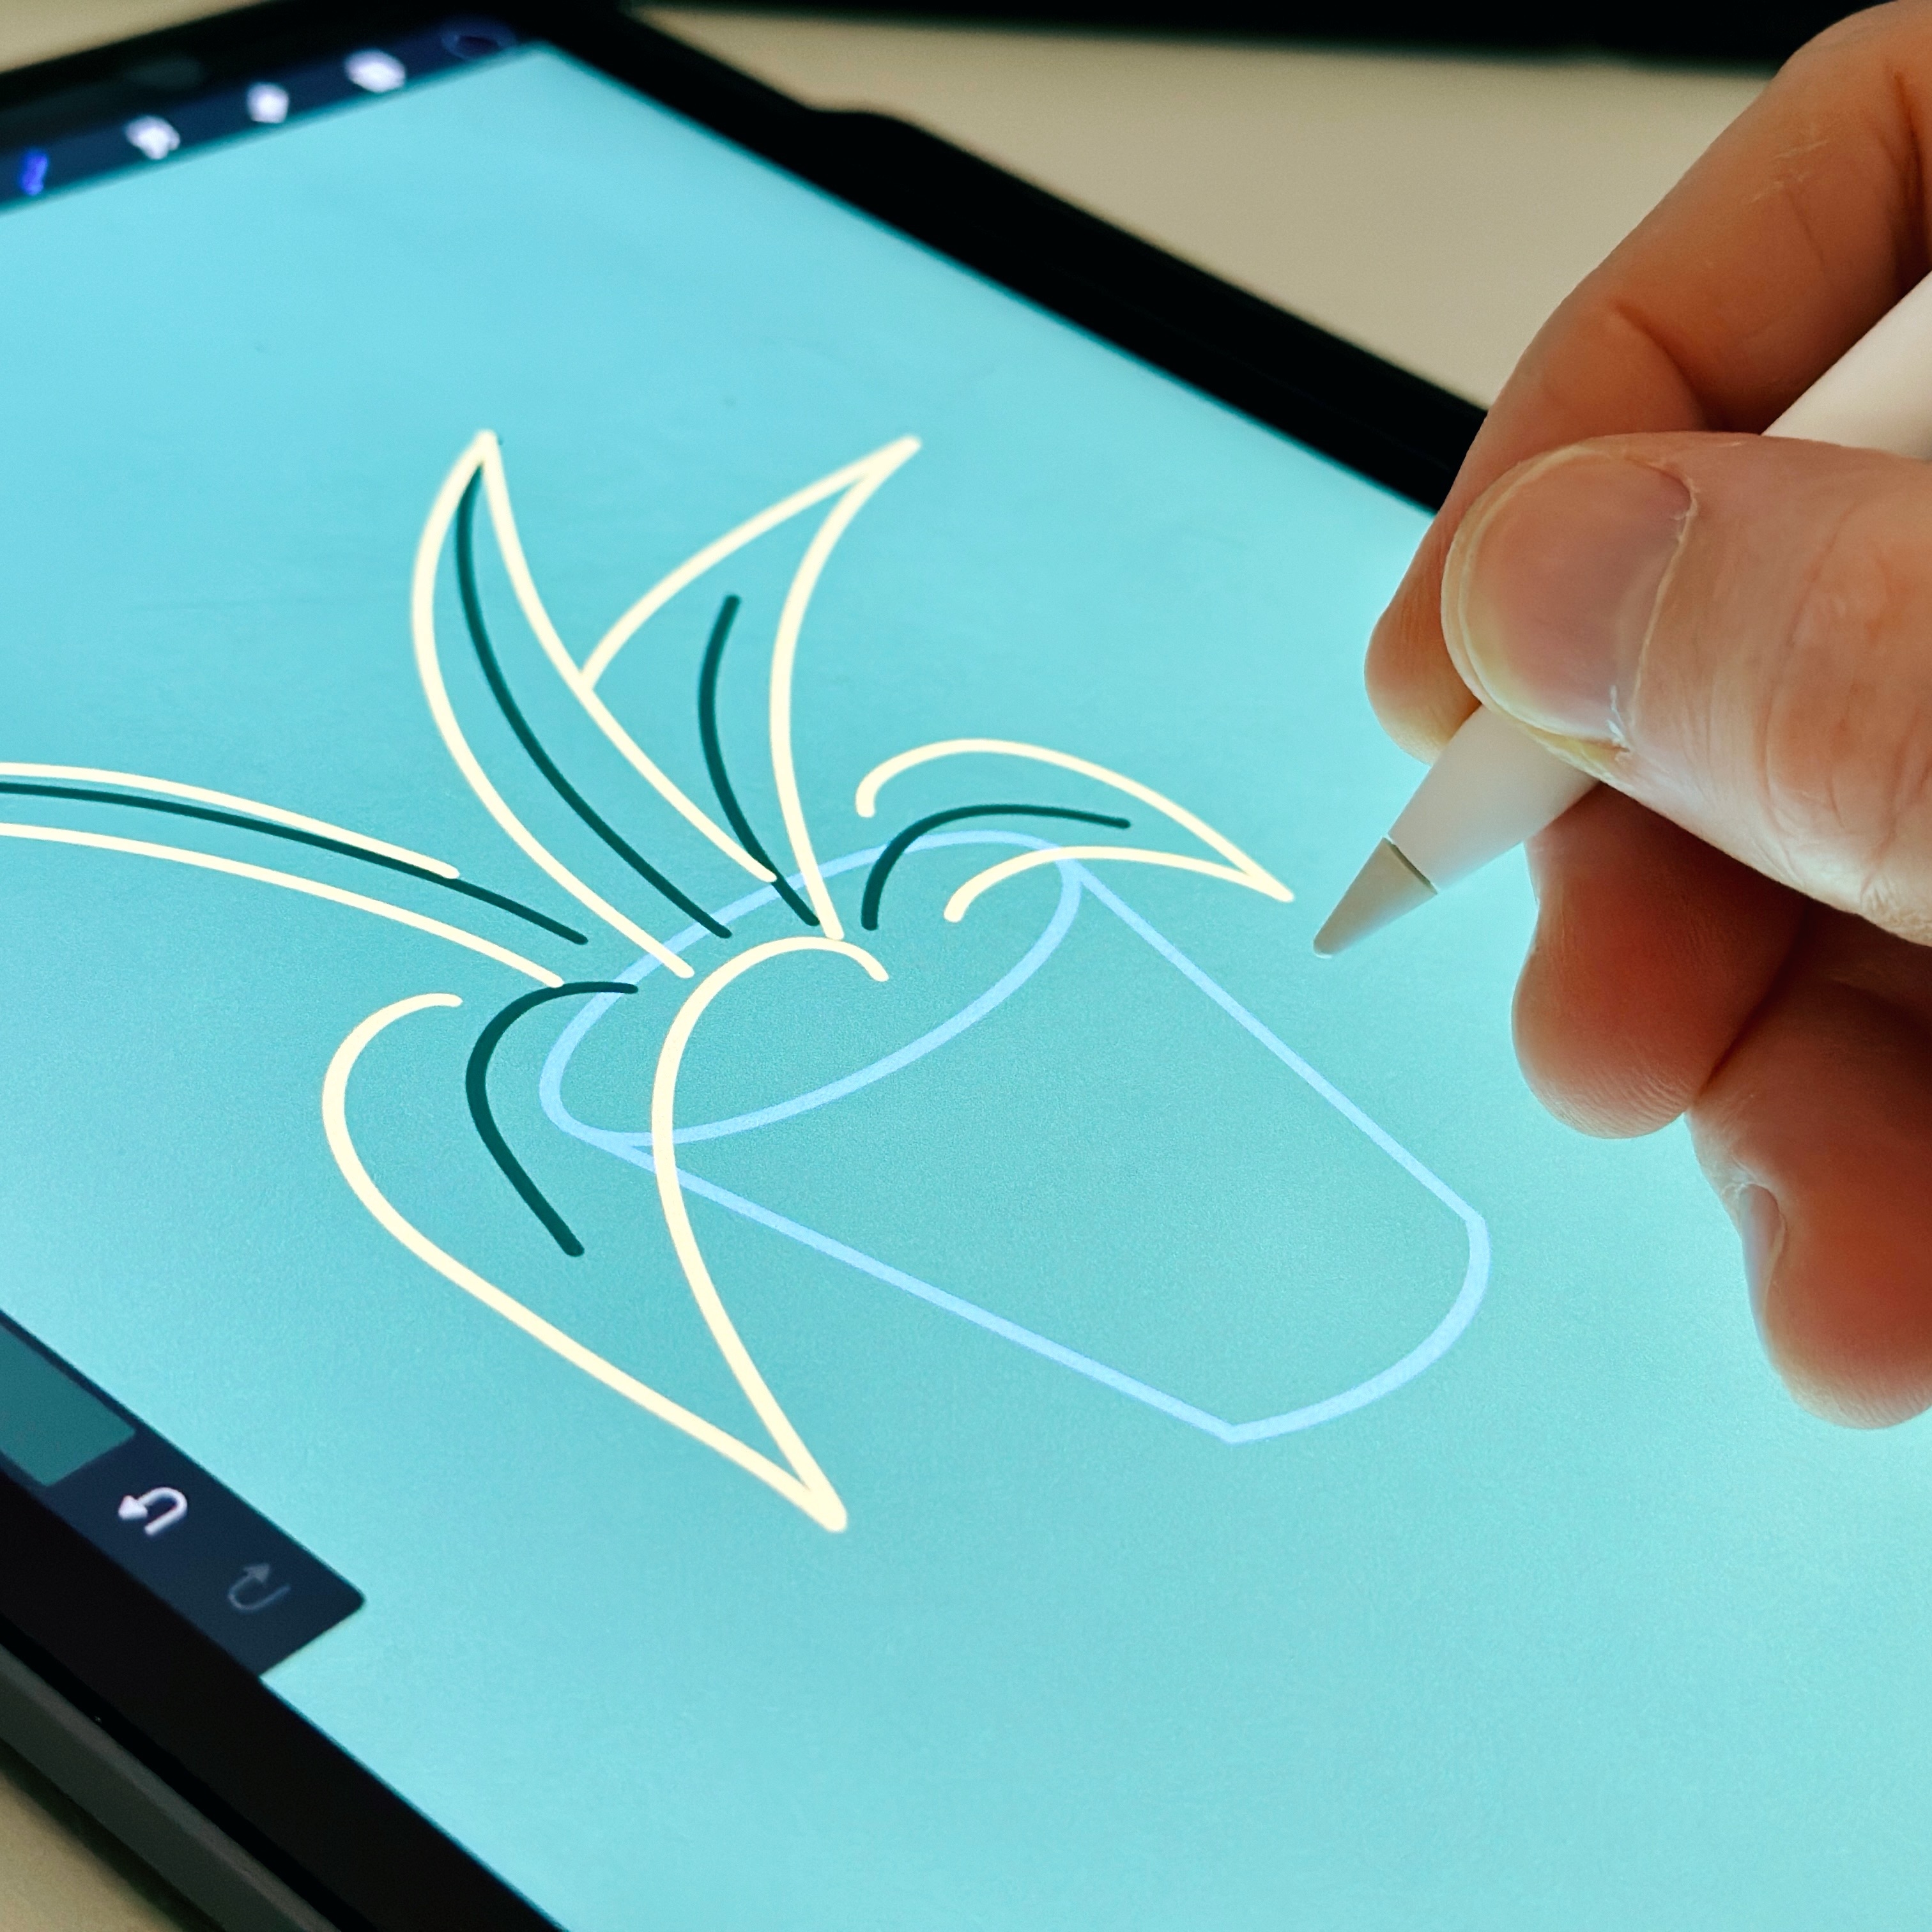 Guy Moorhouse drawing a plant pot on an iPad